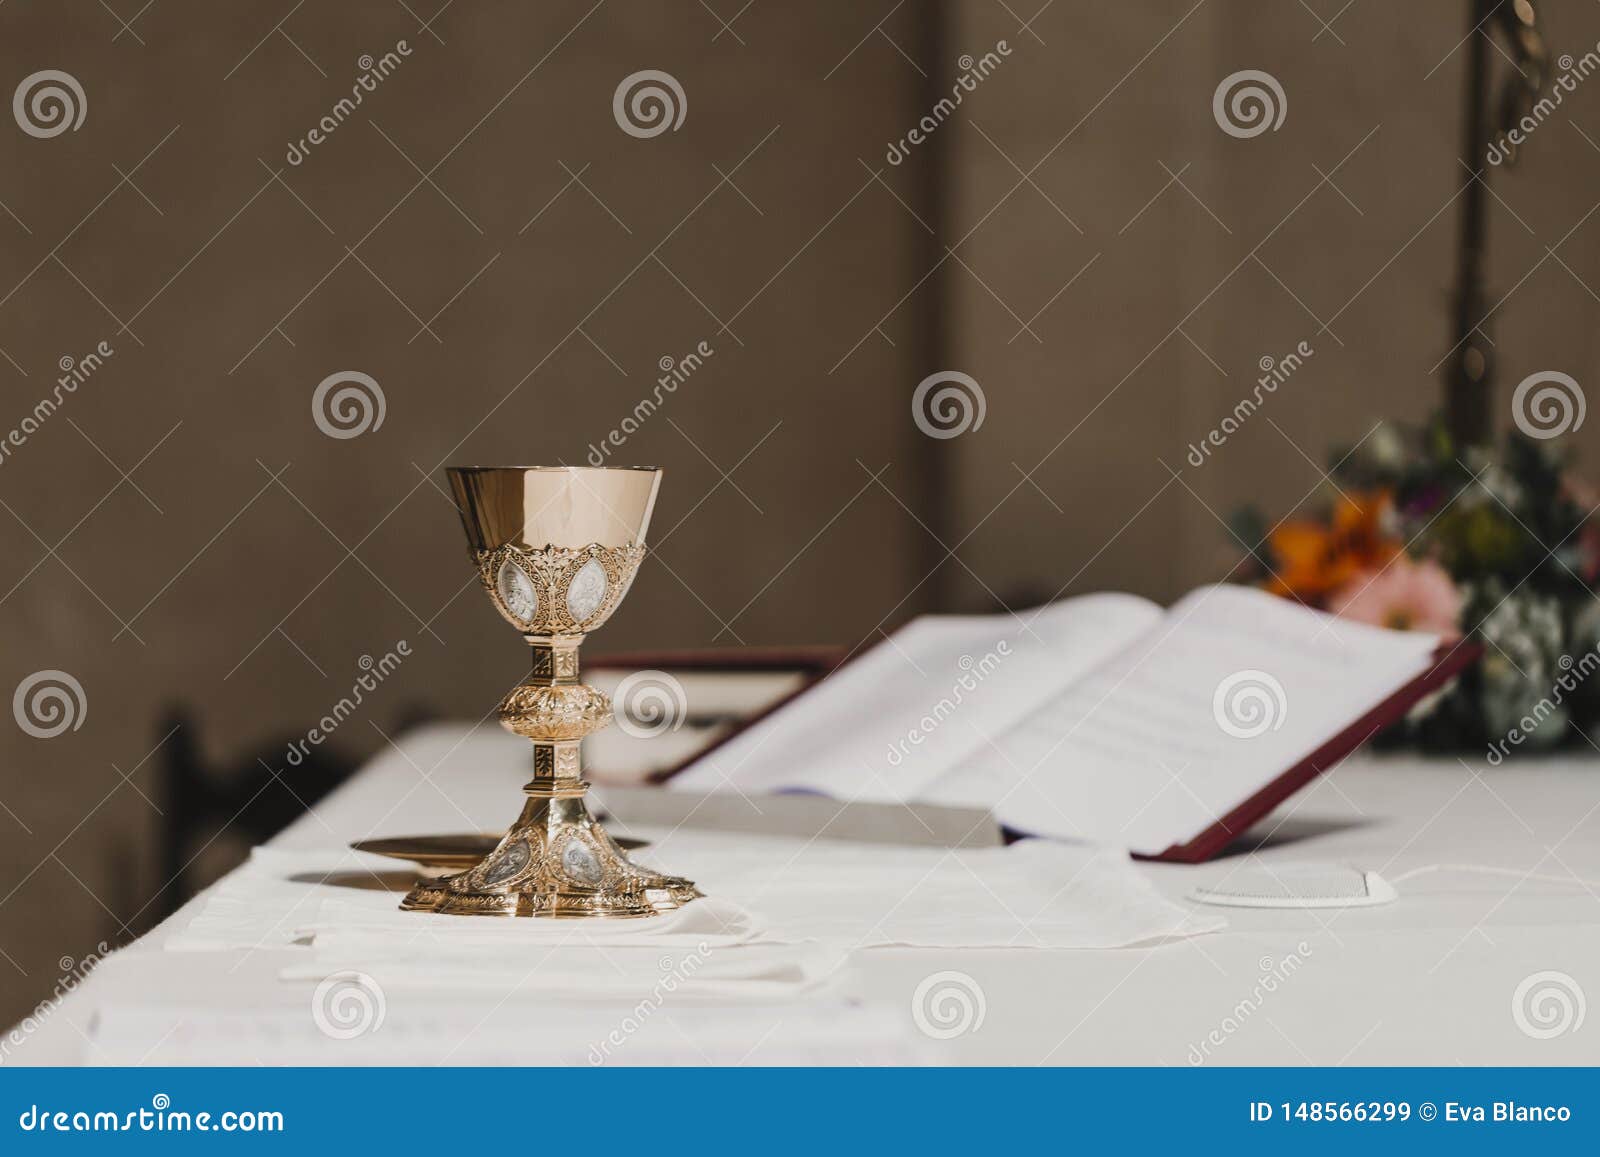 goblet of wine on table during a wedding ceremony nuptial mass. religion concept